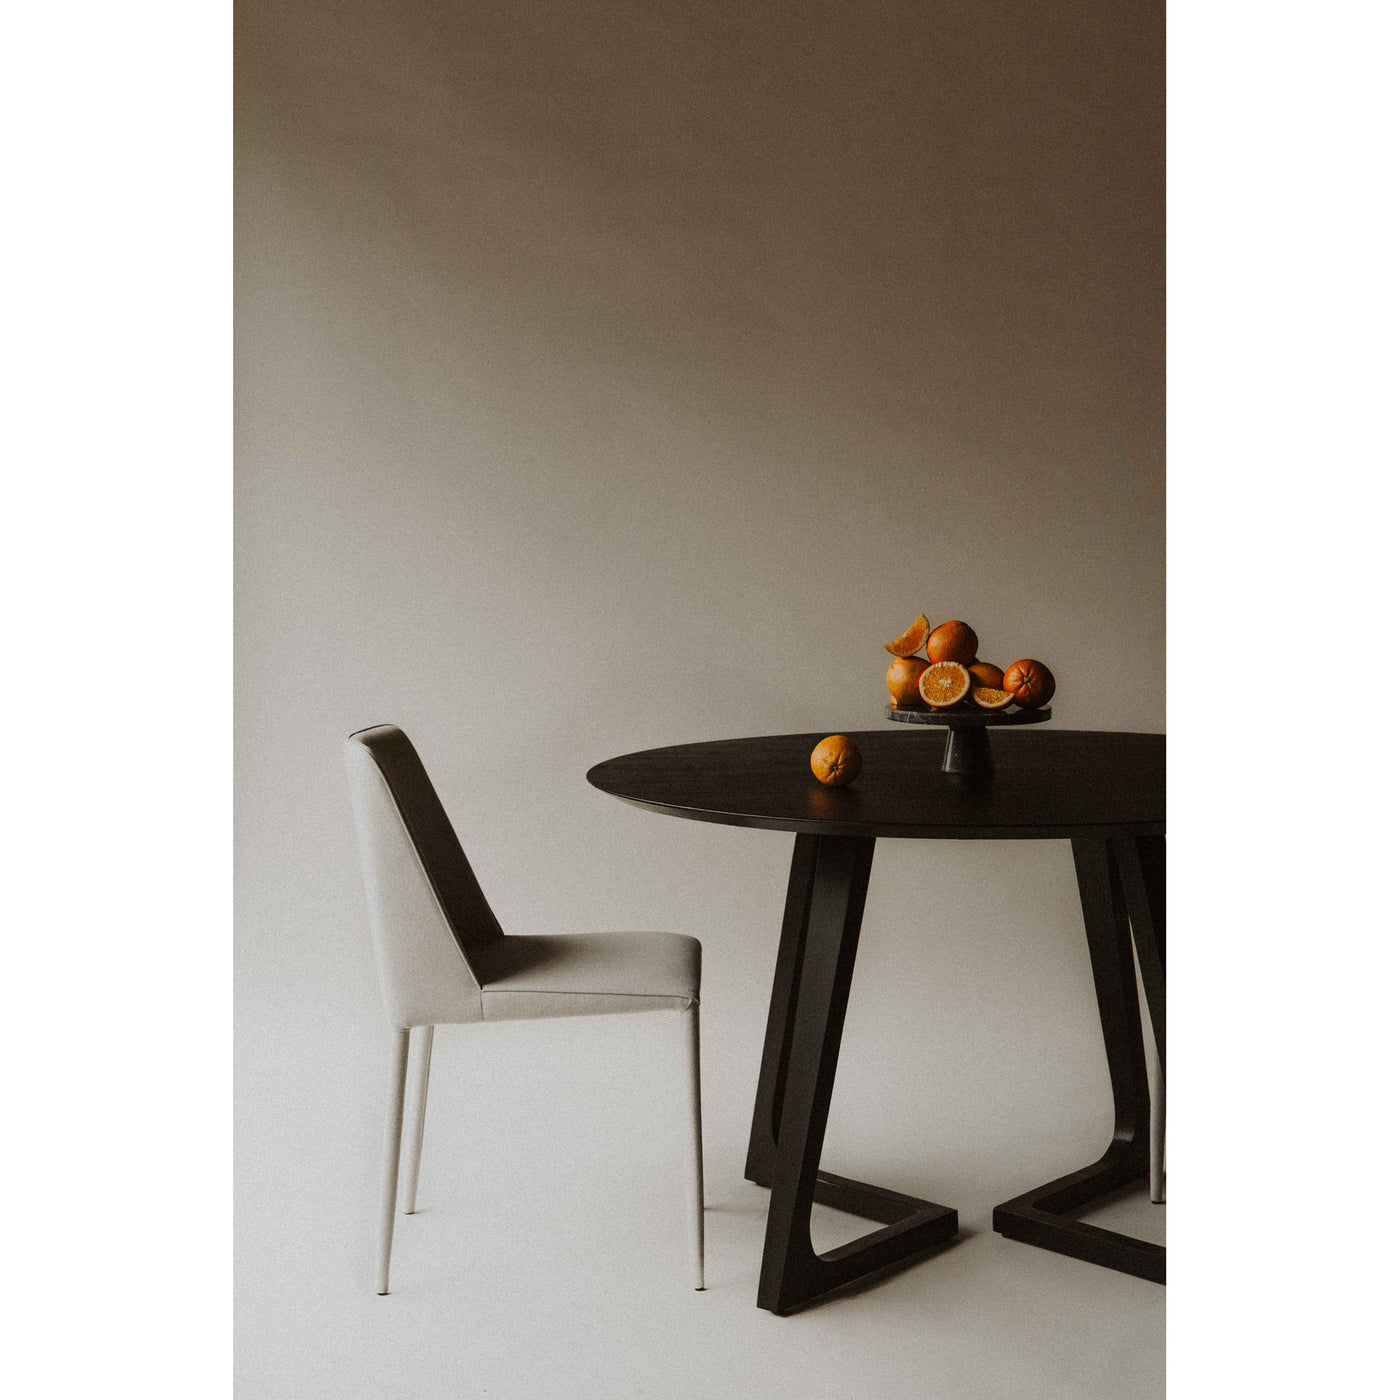 A table for every meal and occasion, big and small. This dining table is made from full-on solid ash wood for a look that ...